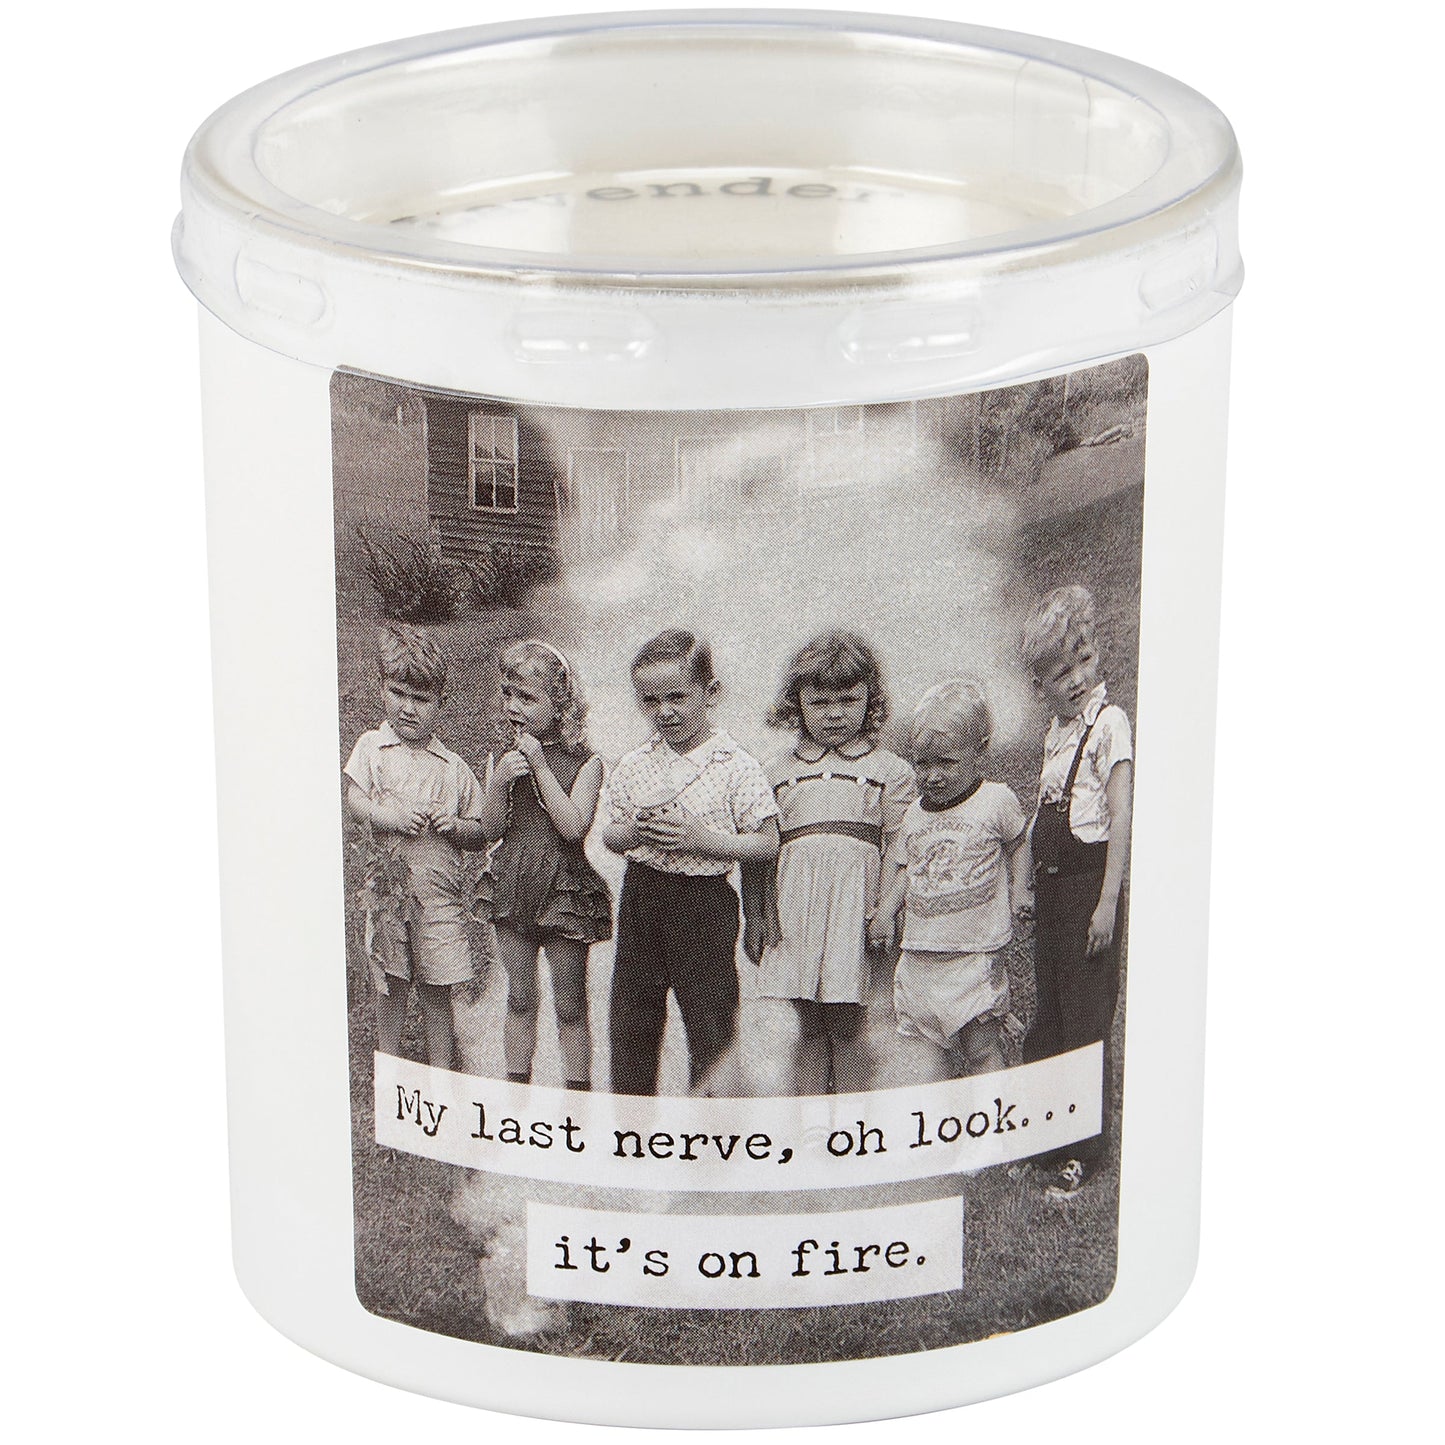 My Last Nerve Jar Candle | Vintage Photograph Double Sided Design | Soy Wax Lavender Scent